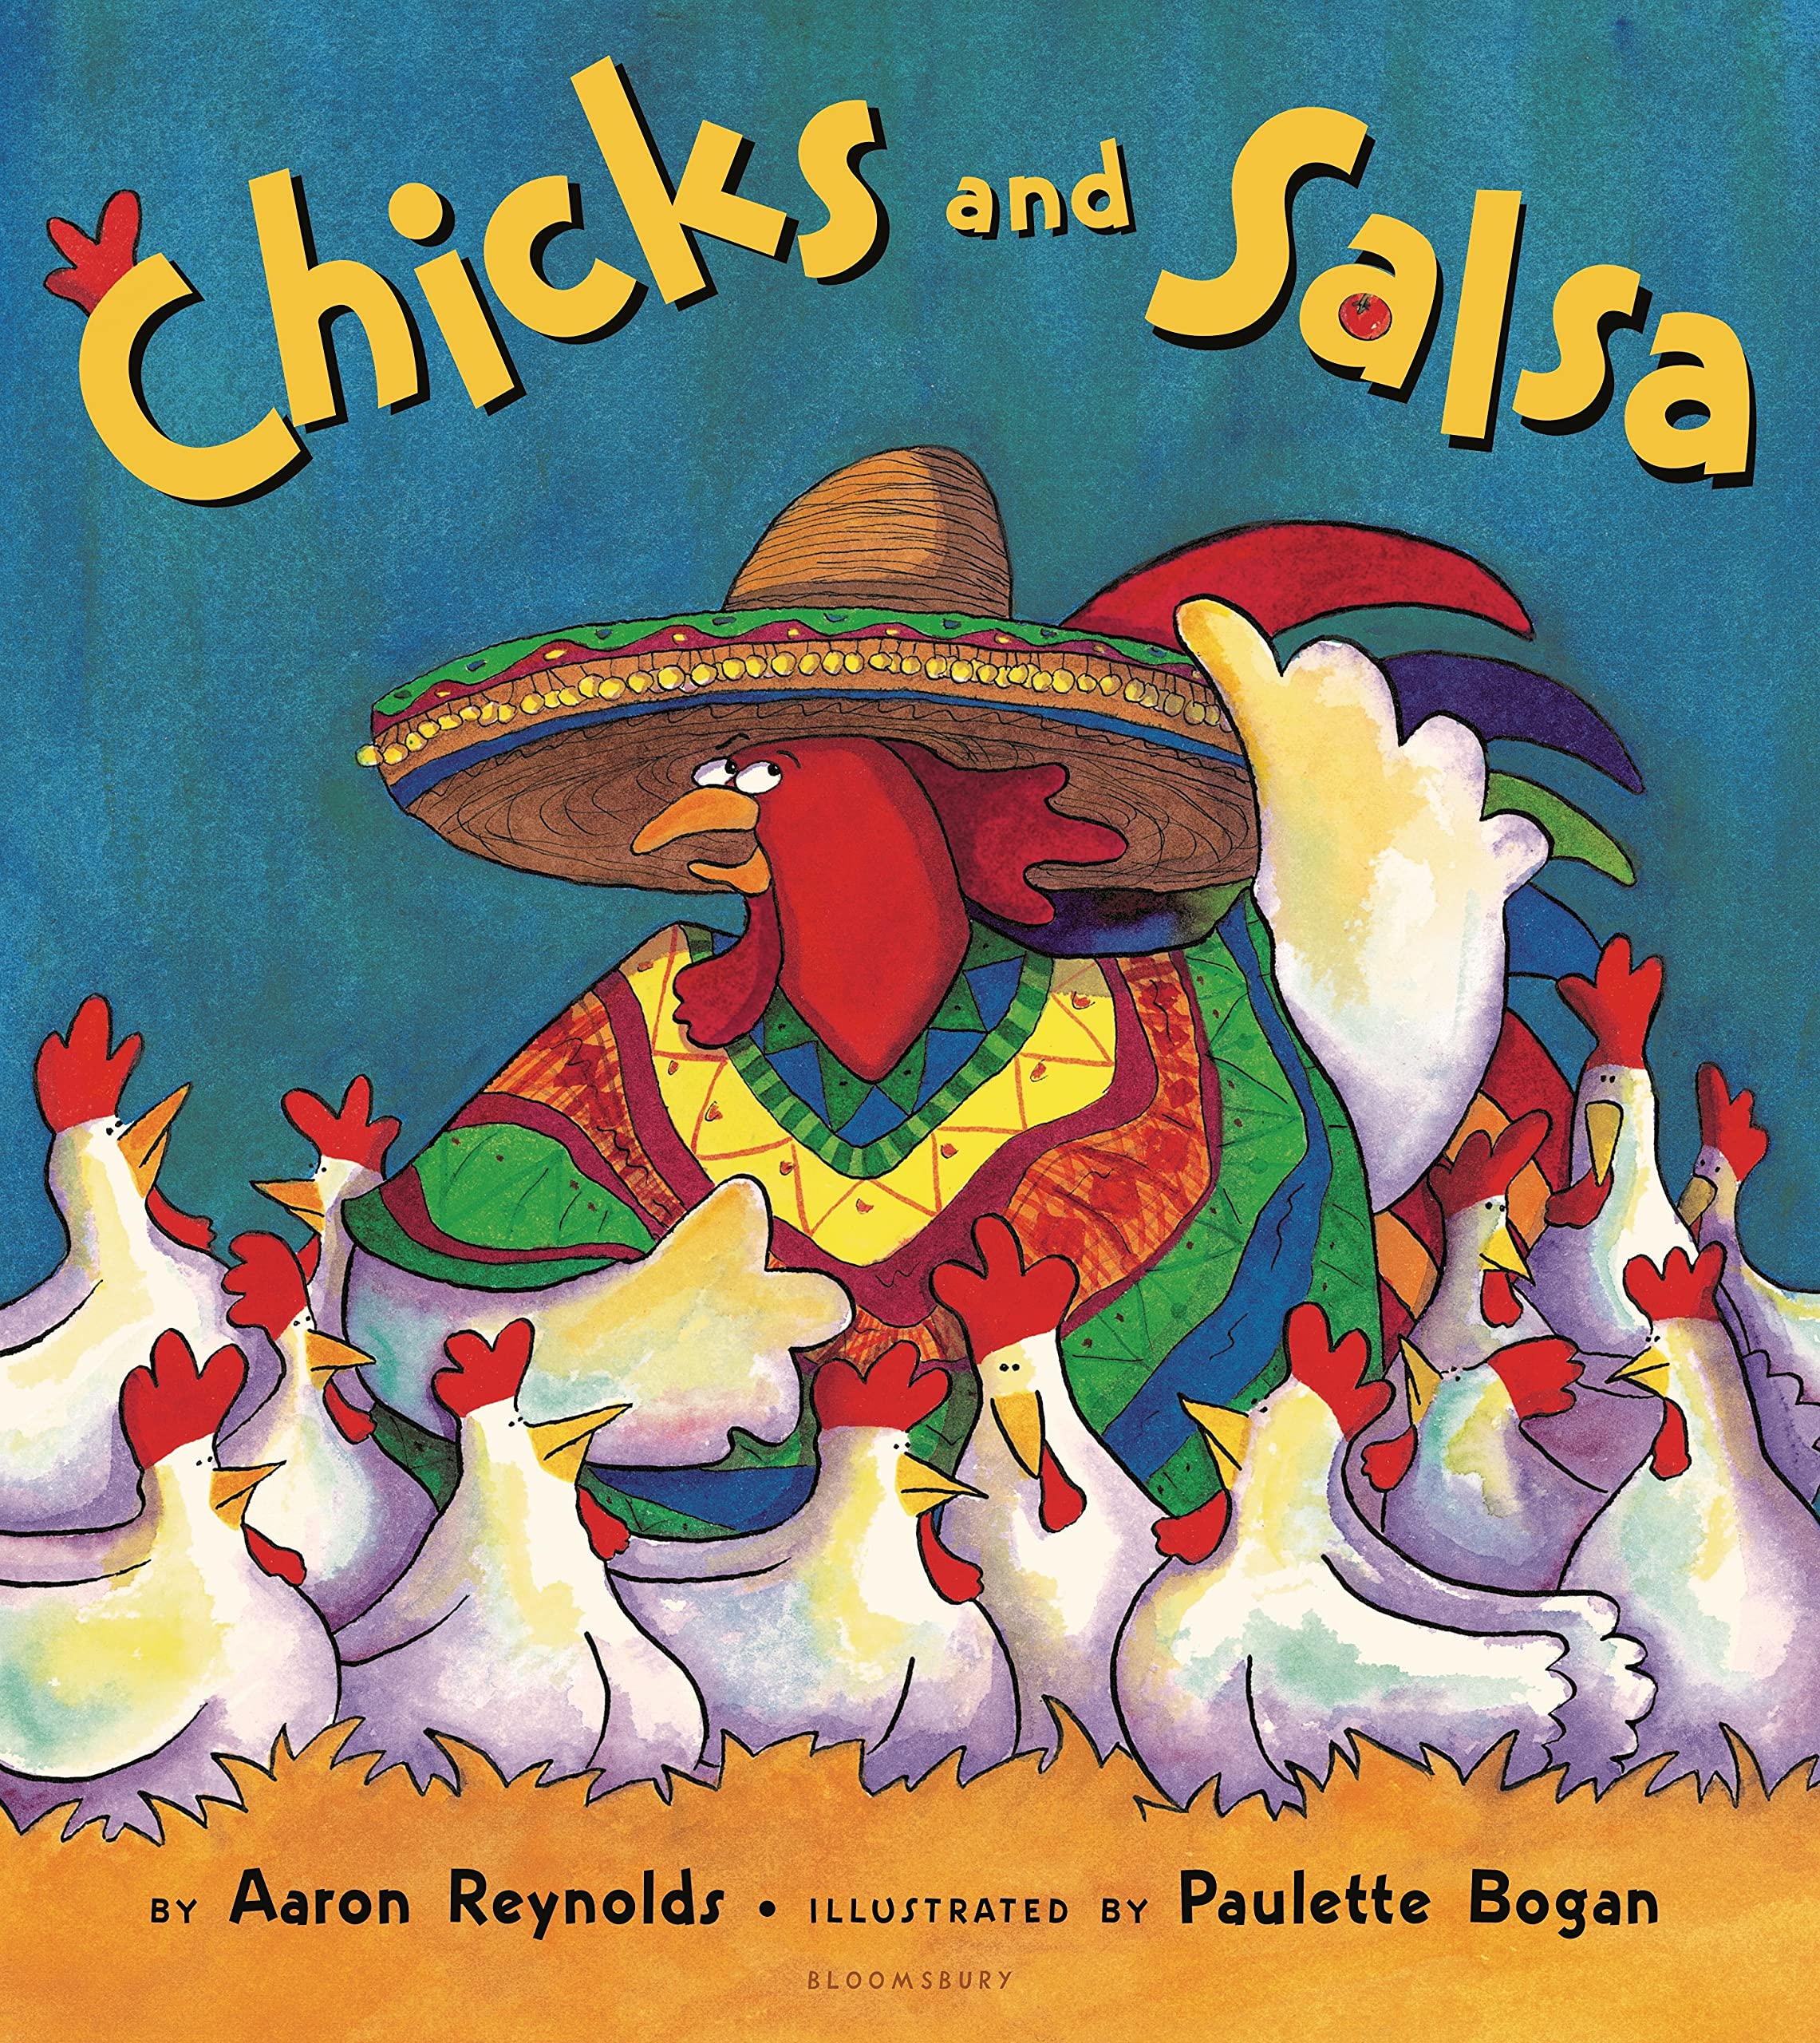 speech and language teaching concepts for Chicks and Salsa in speech therapy​ ​